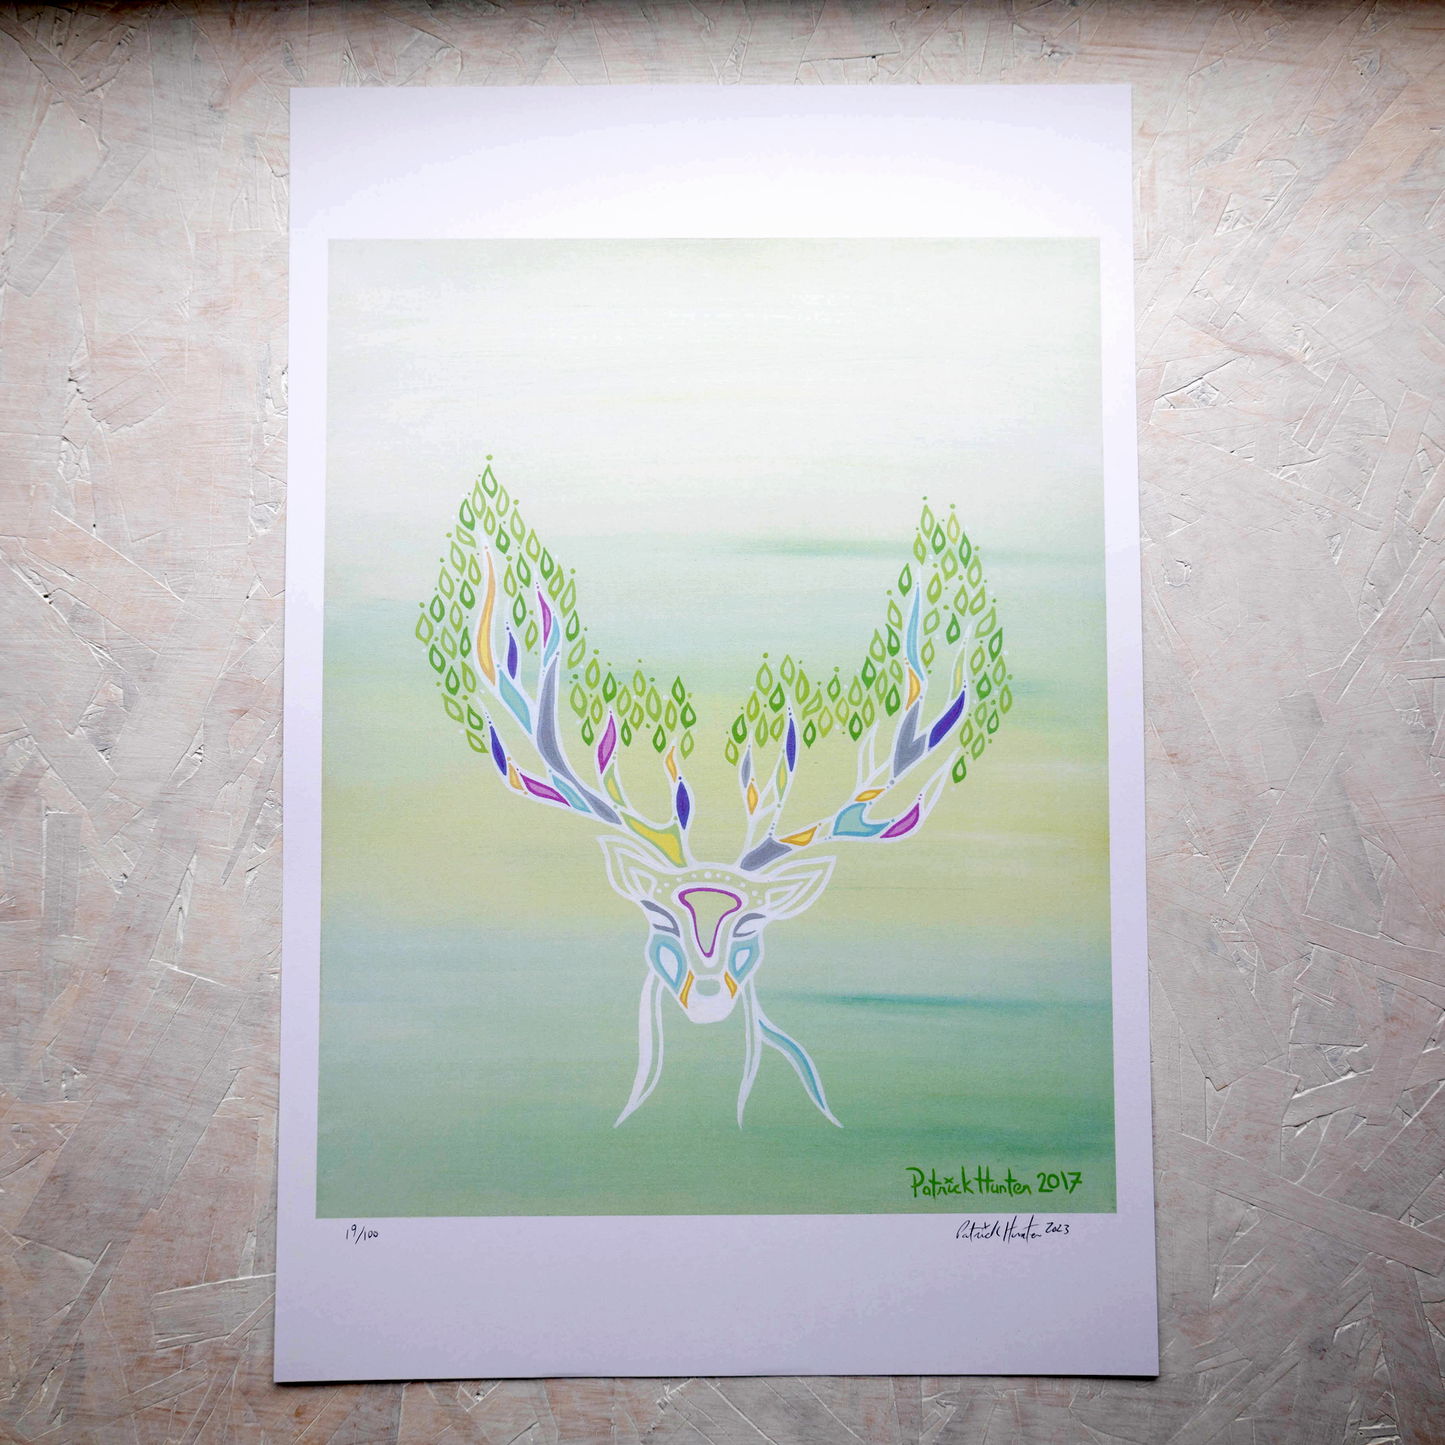 Print of Patrick Hunter's painting of a deer spirit in woodland art style.